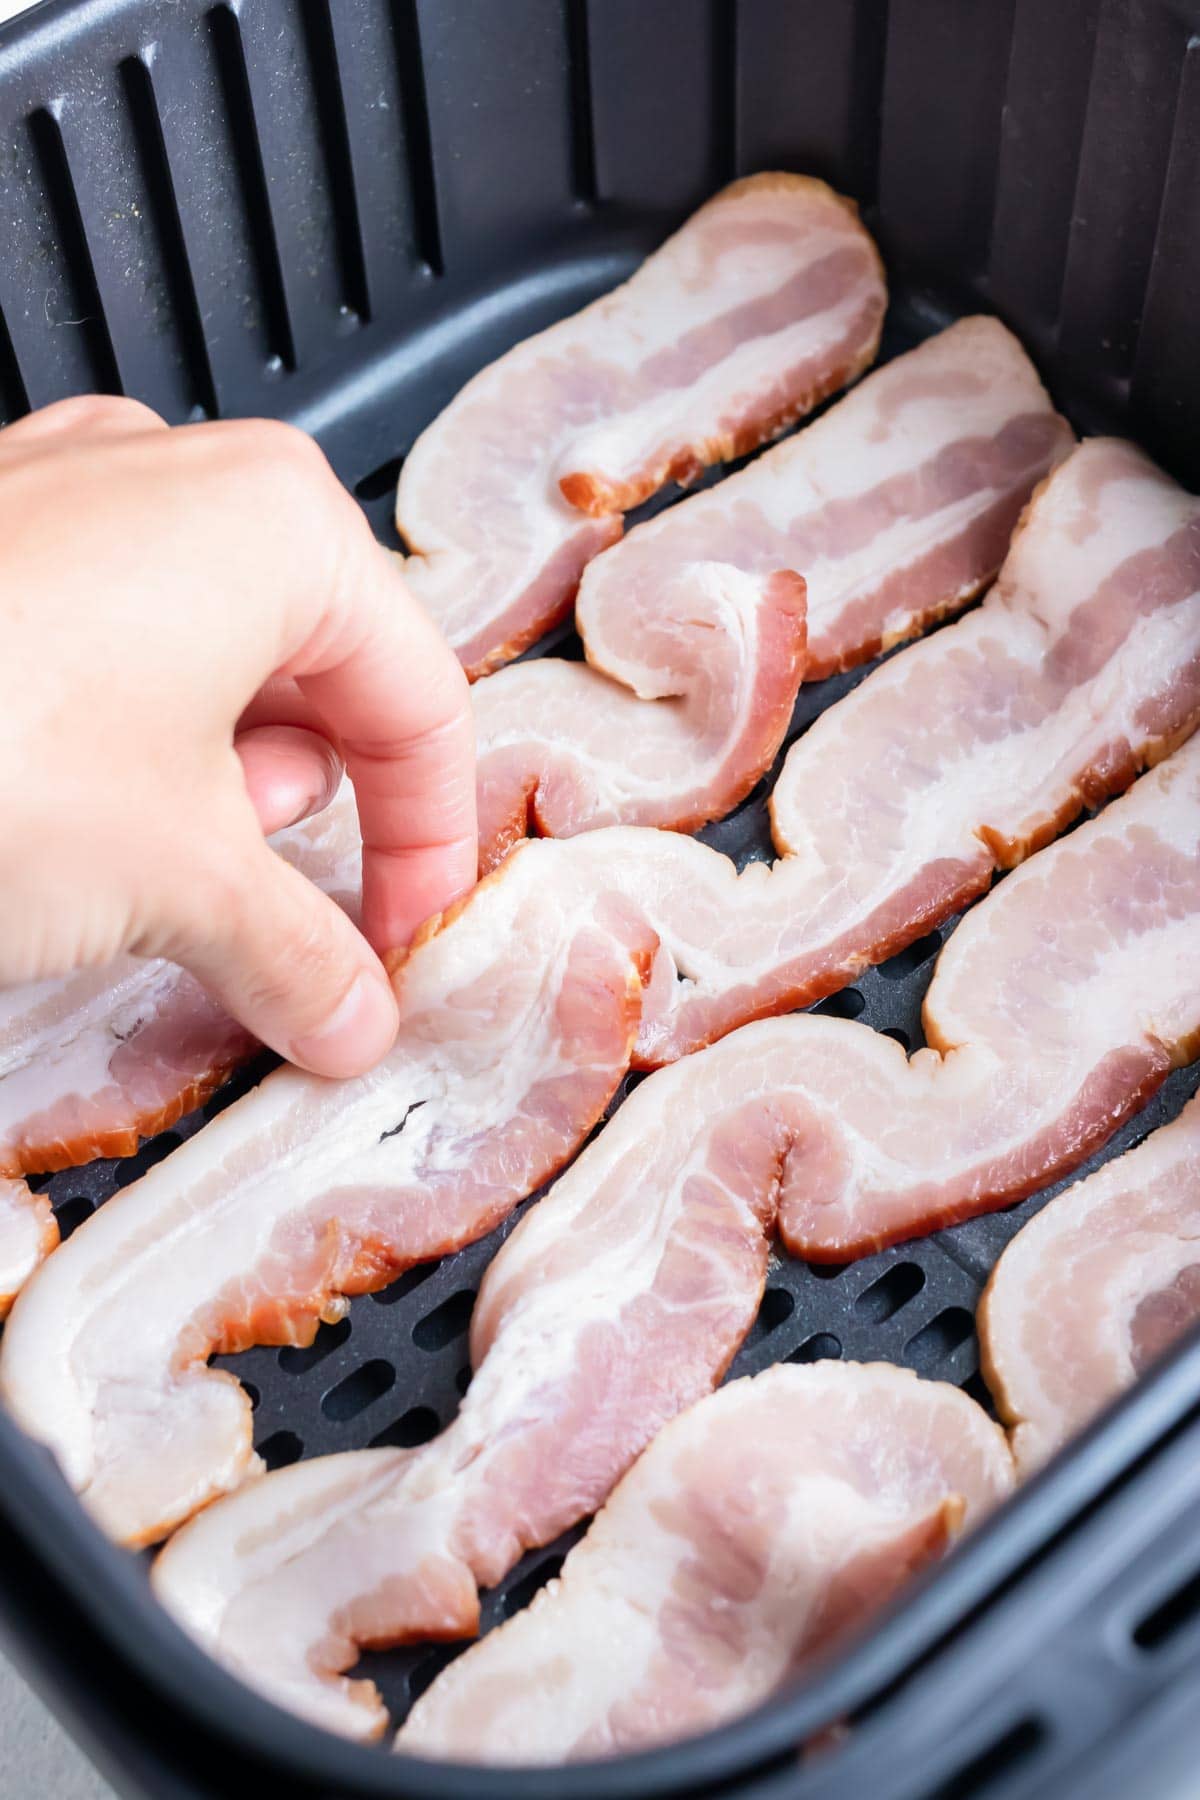 Bacon is positioned by a hand so none are overlapping.